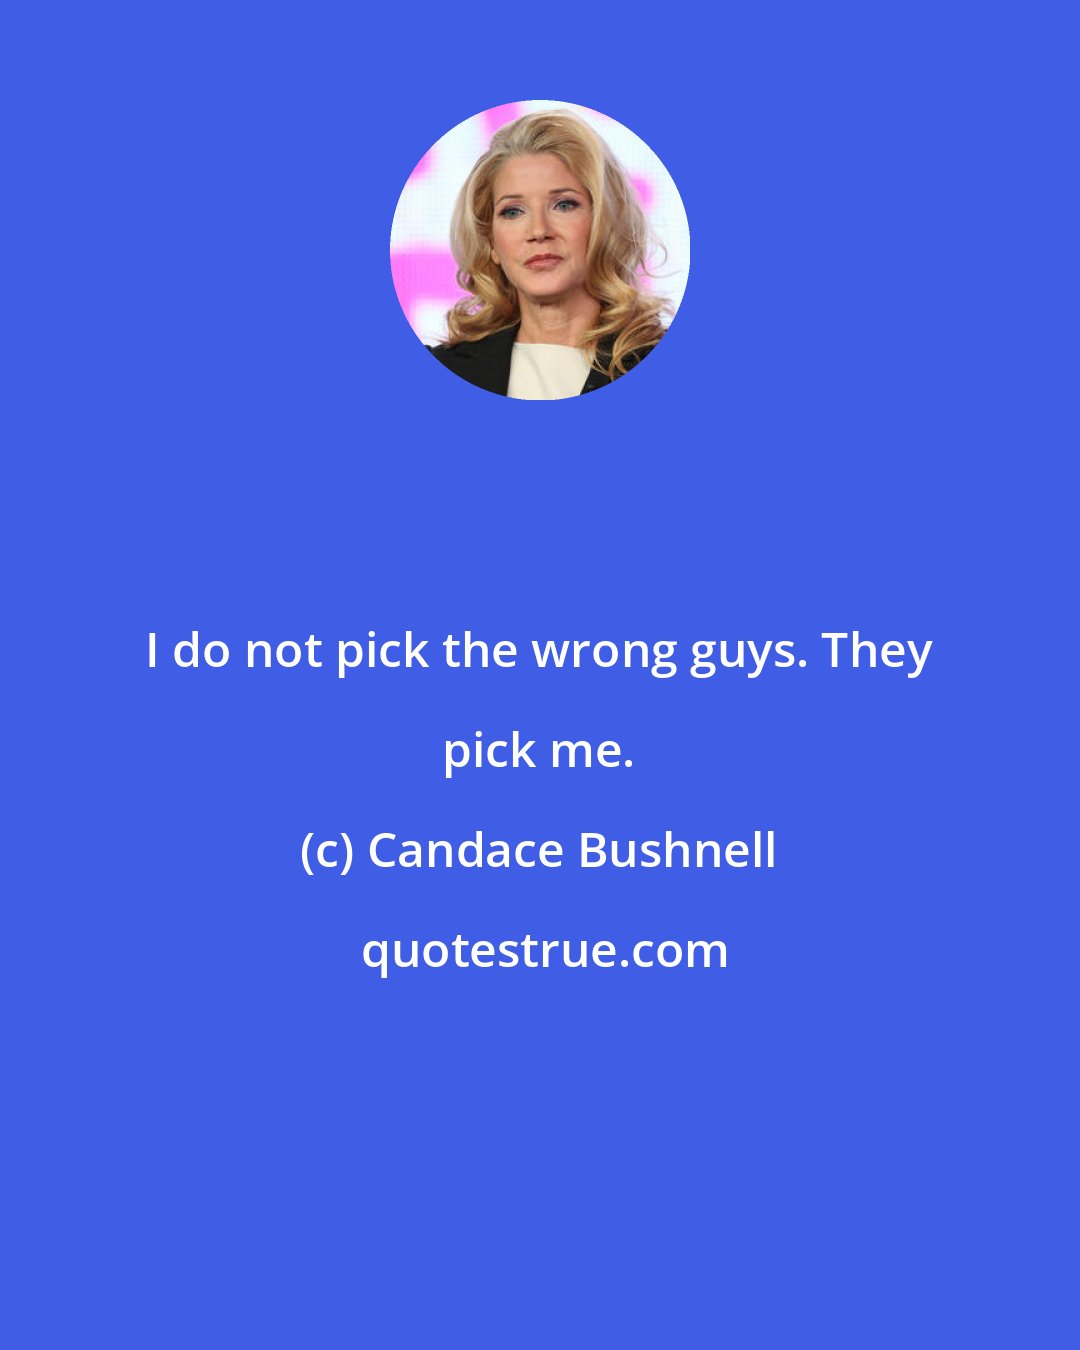 Candace Bushnell: I do not pick the wrong guys. They pick me.